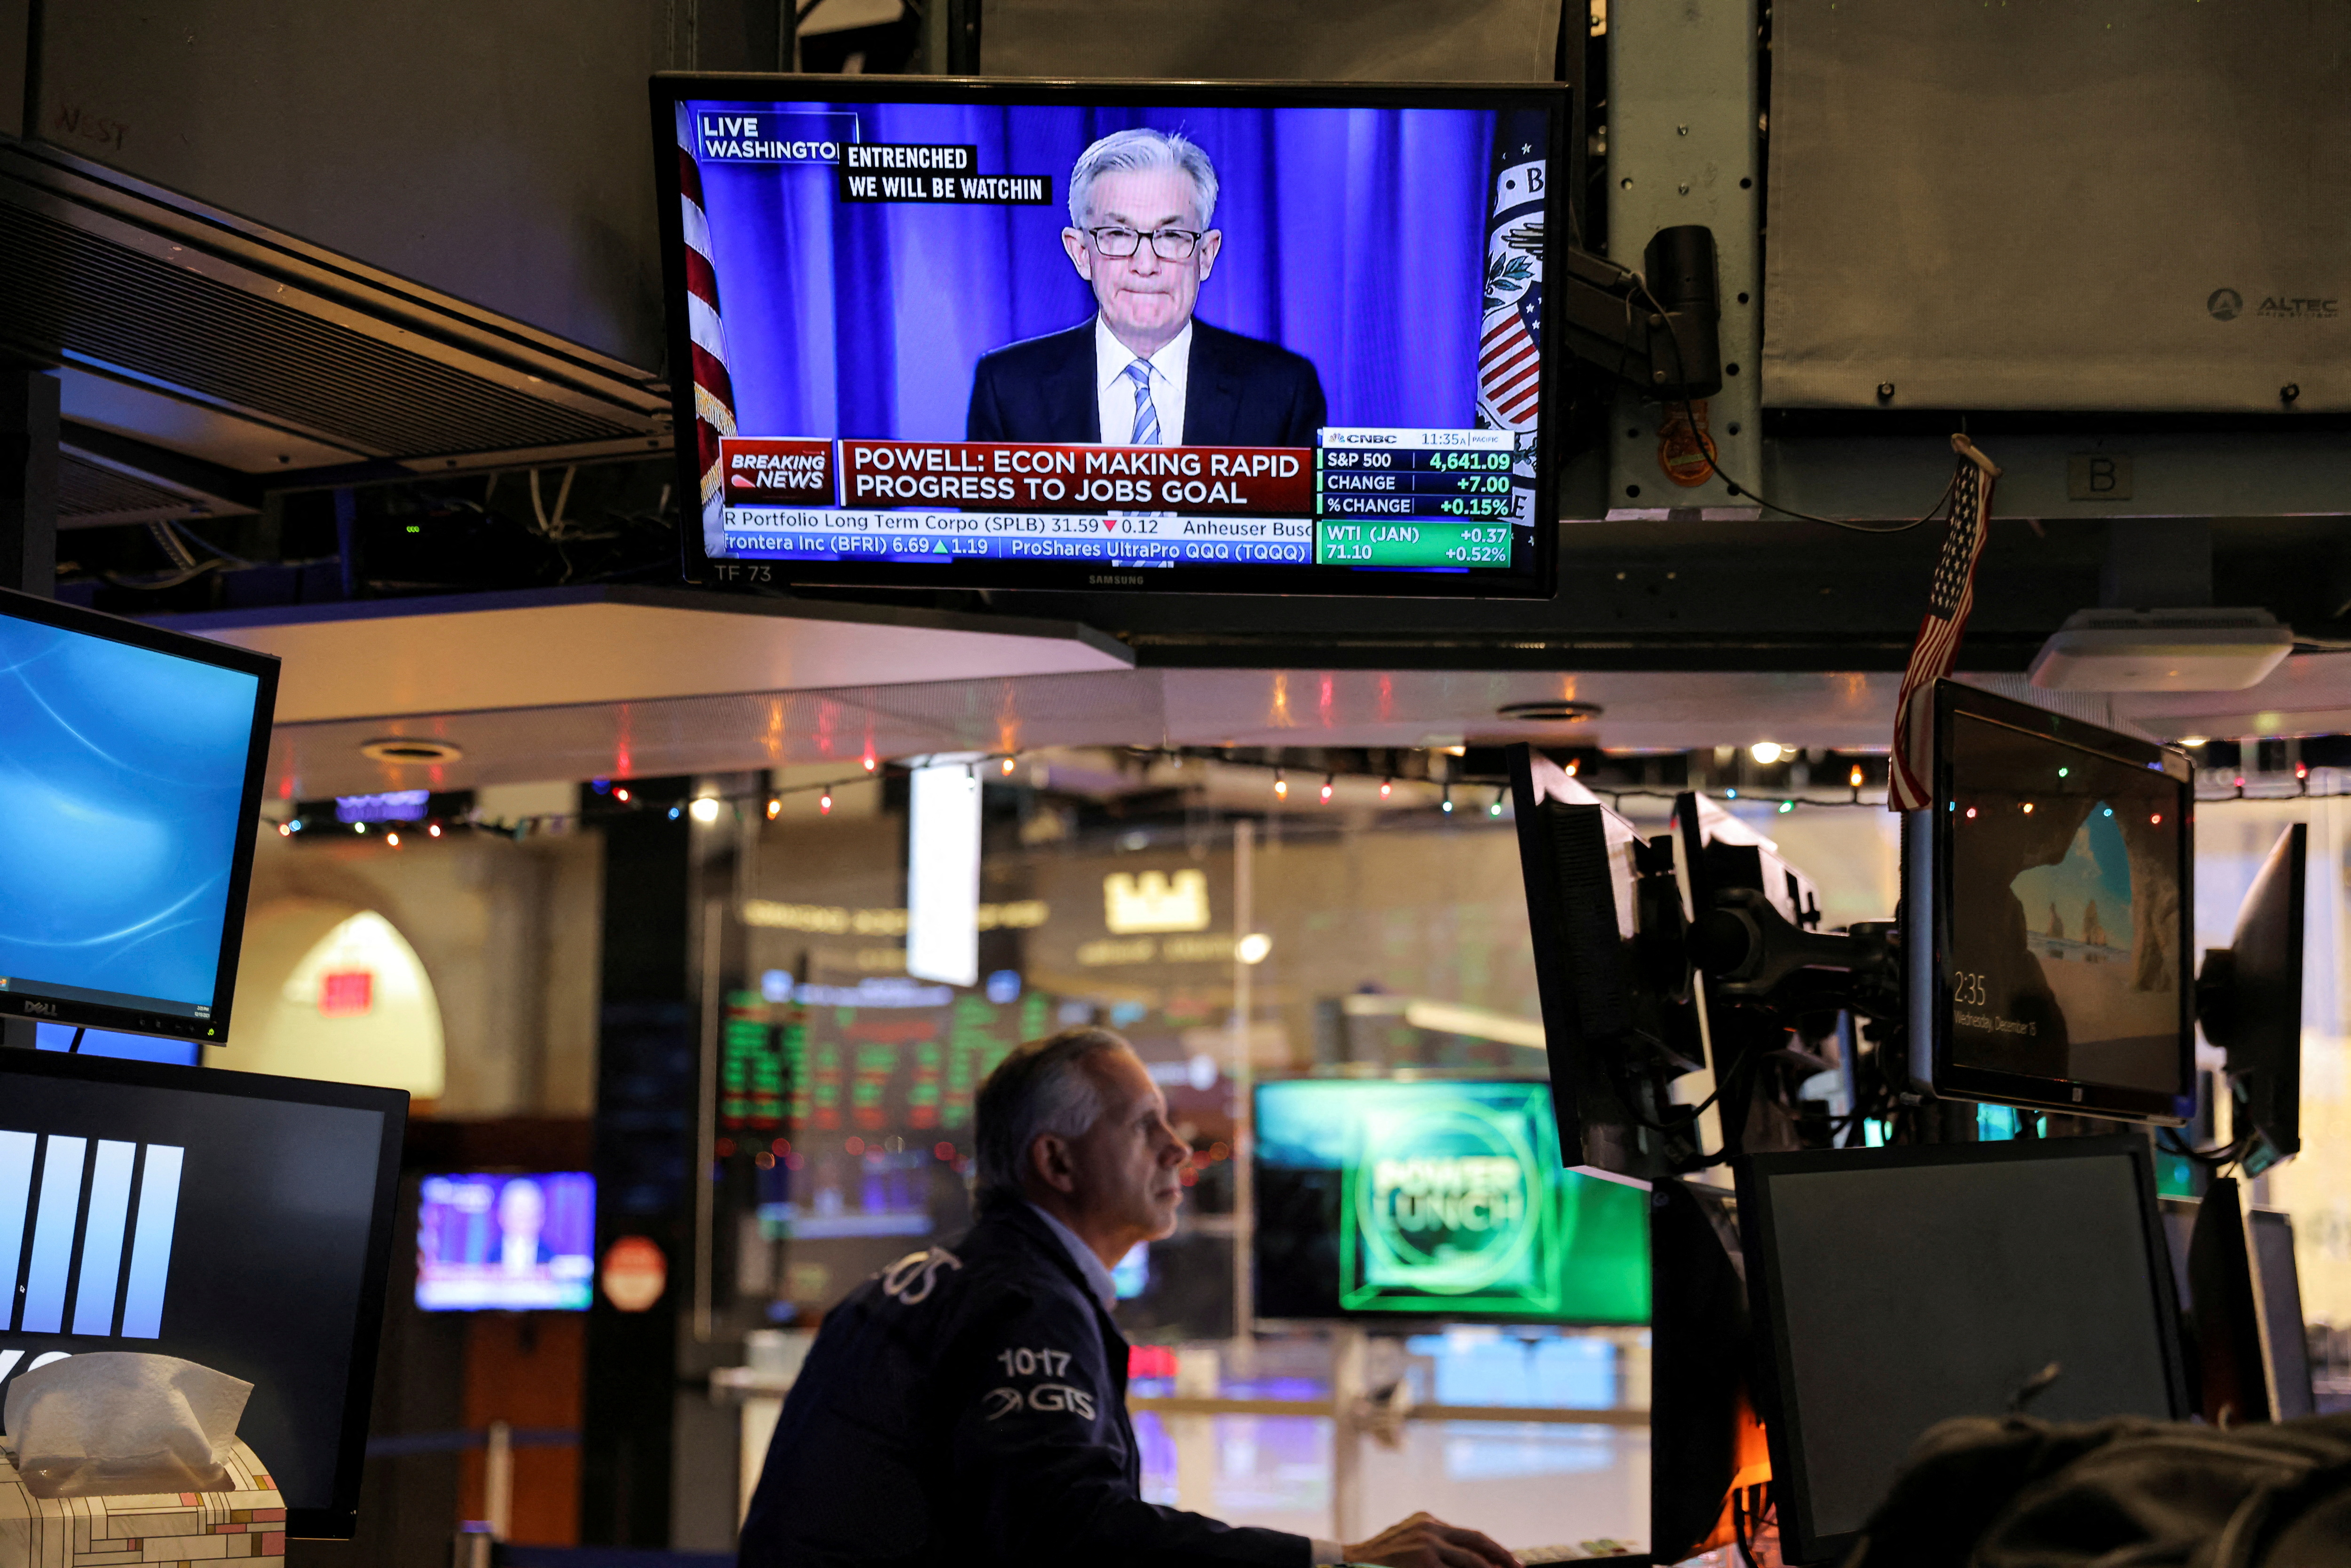 Federal Reserve Chair Jerome Powell is seen delivering remarks on screen at the New York Stock Exchange (NYSE) in Manhattan